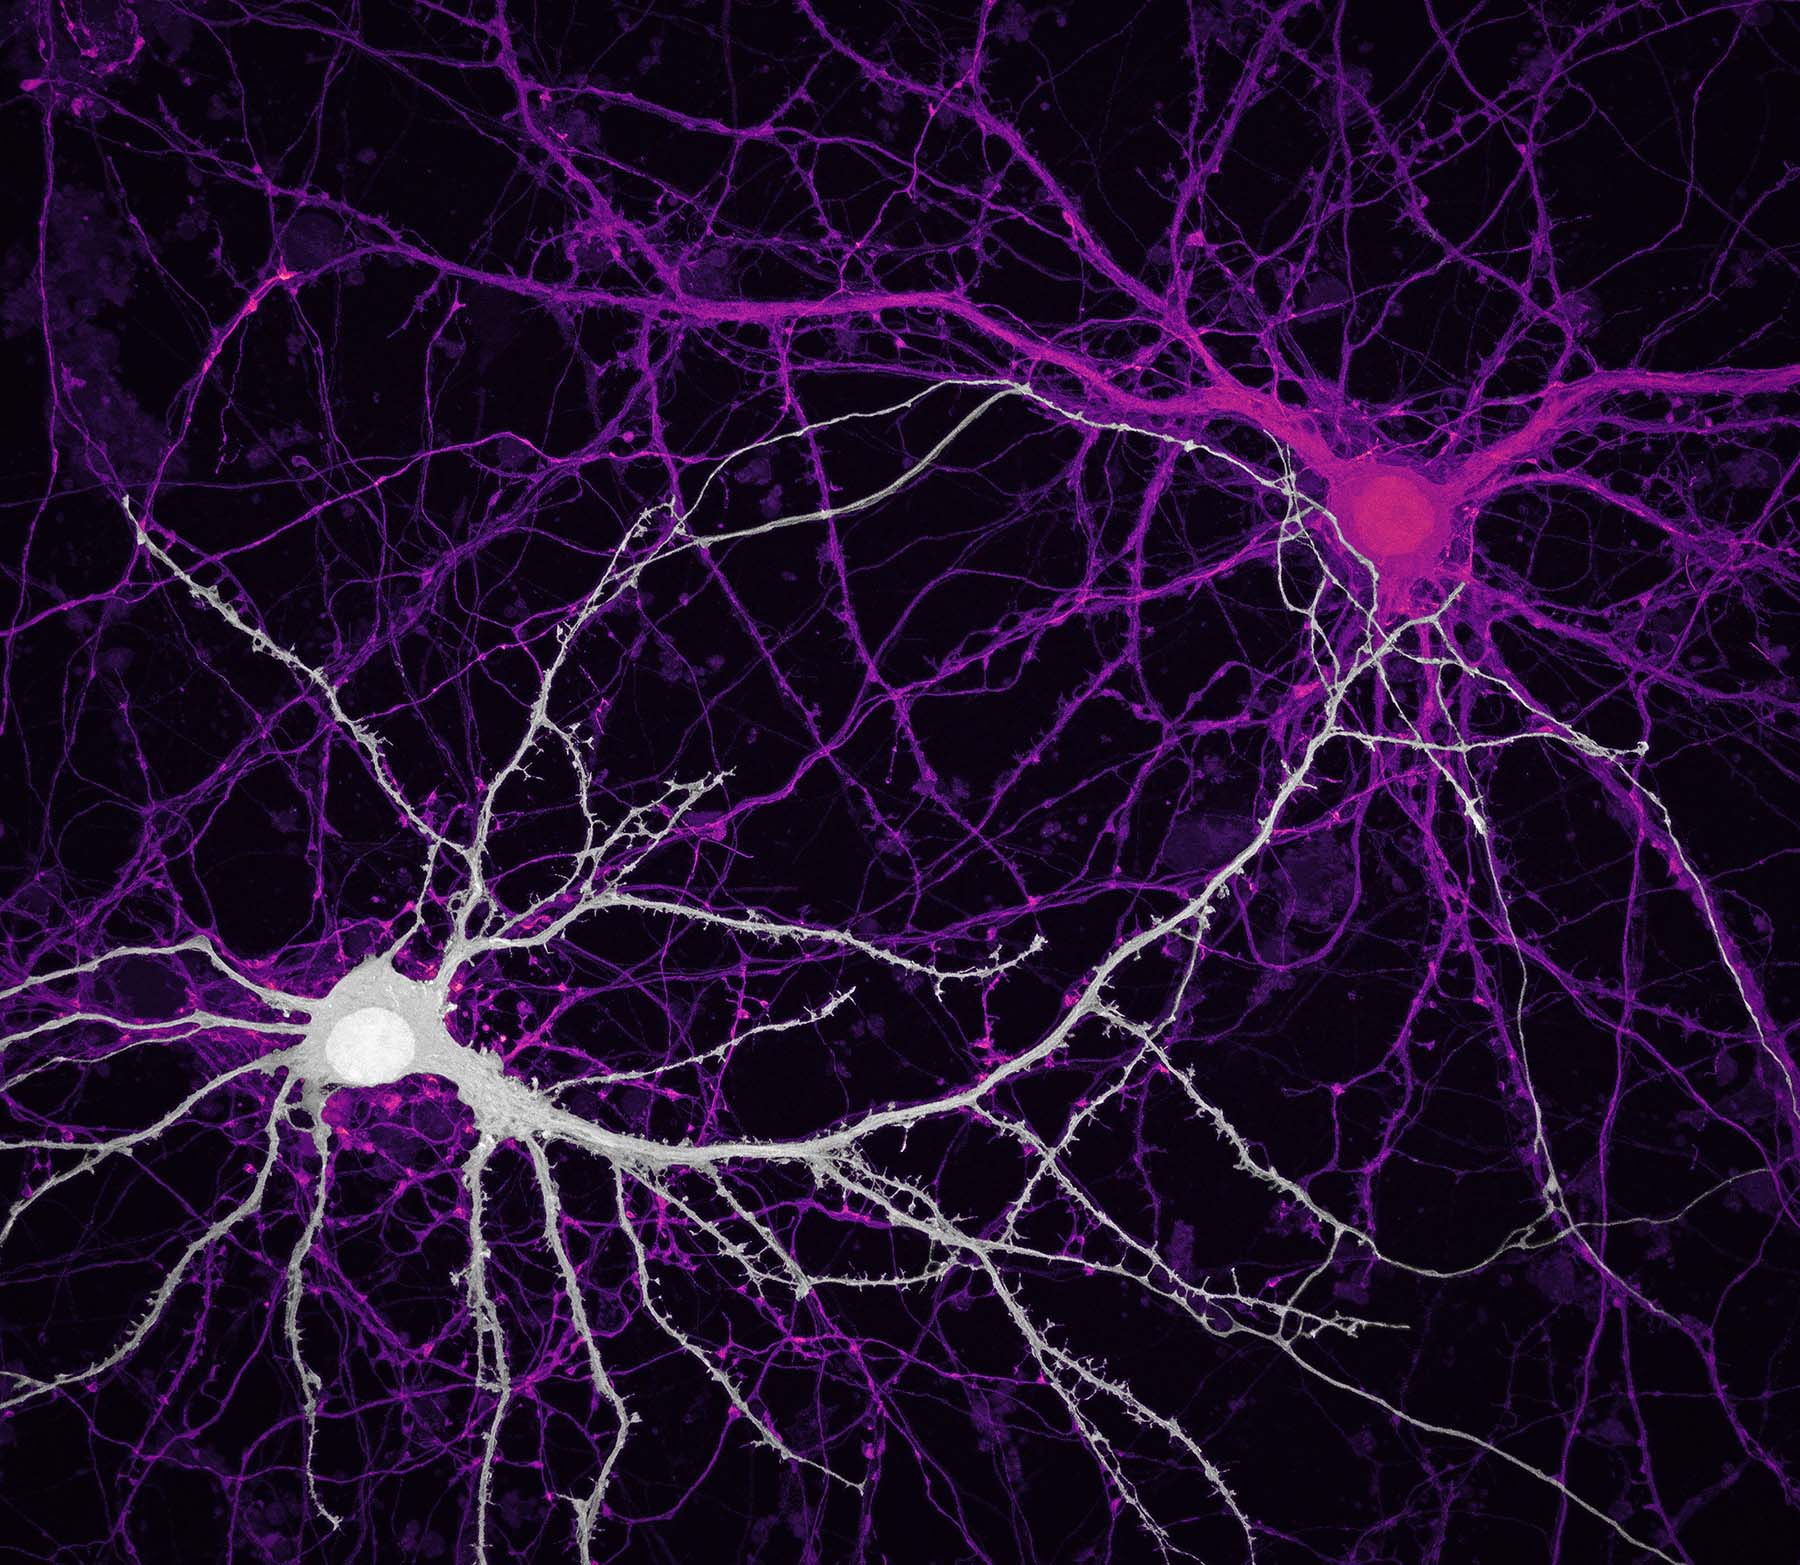 Connections between hippocampal neurons (brain cells) - Credit Jason Kirk Quynh Nguyen